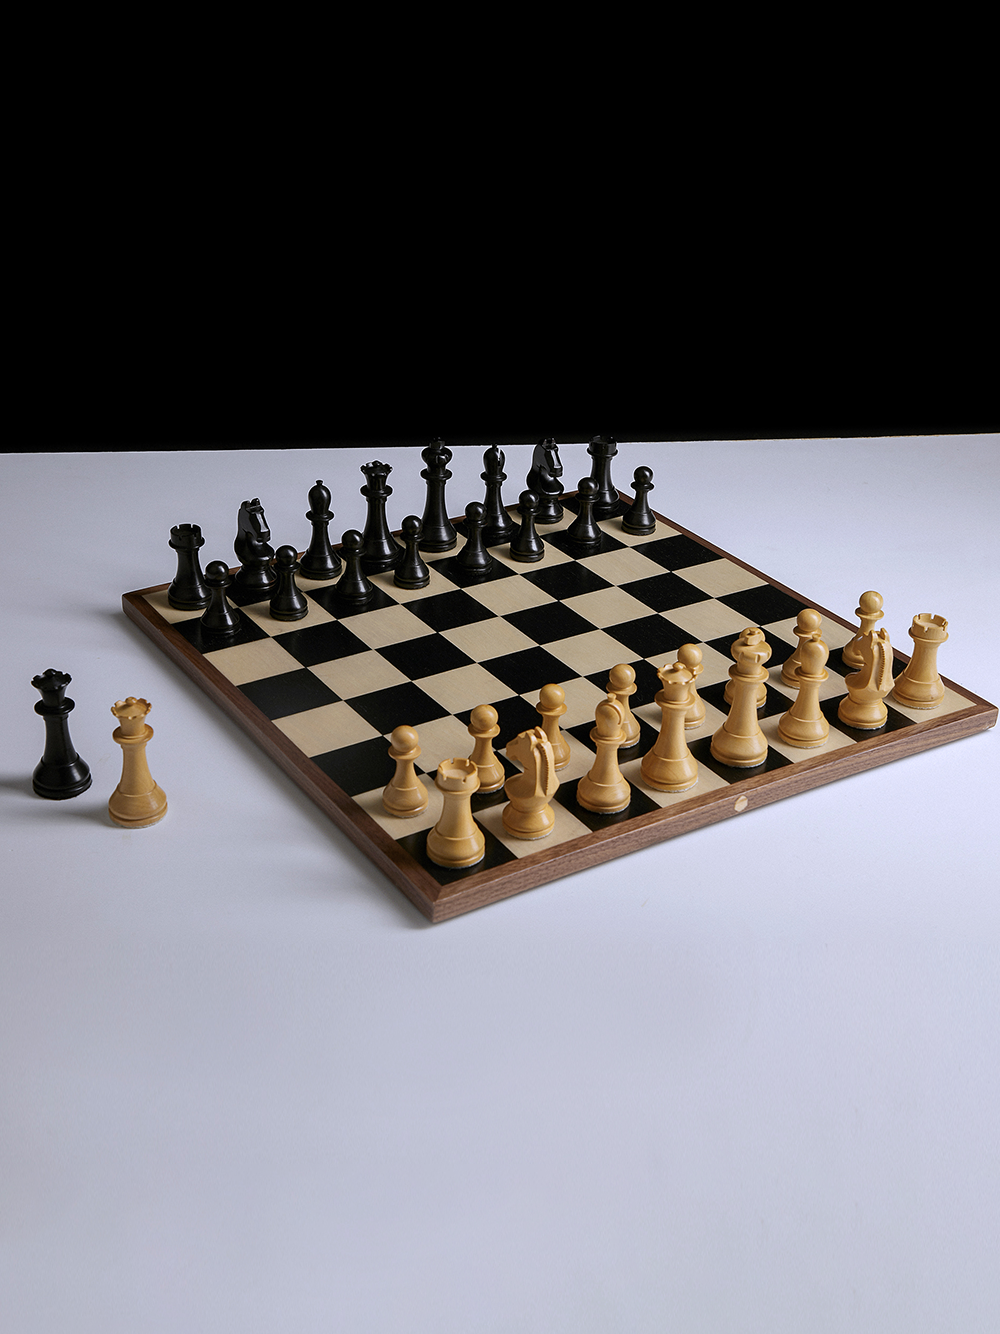 World Chess Set (Home Edition with Bauhaus Board)